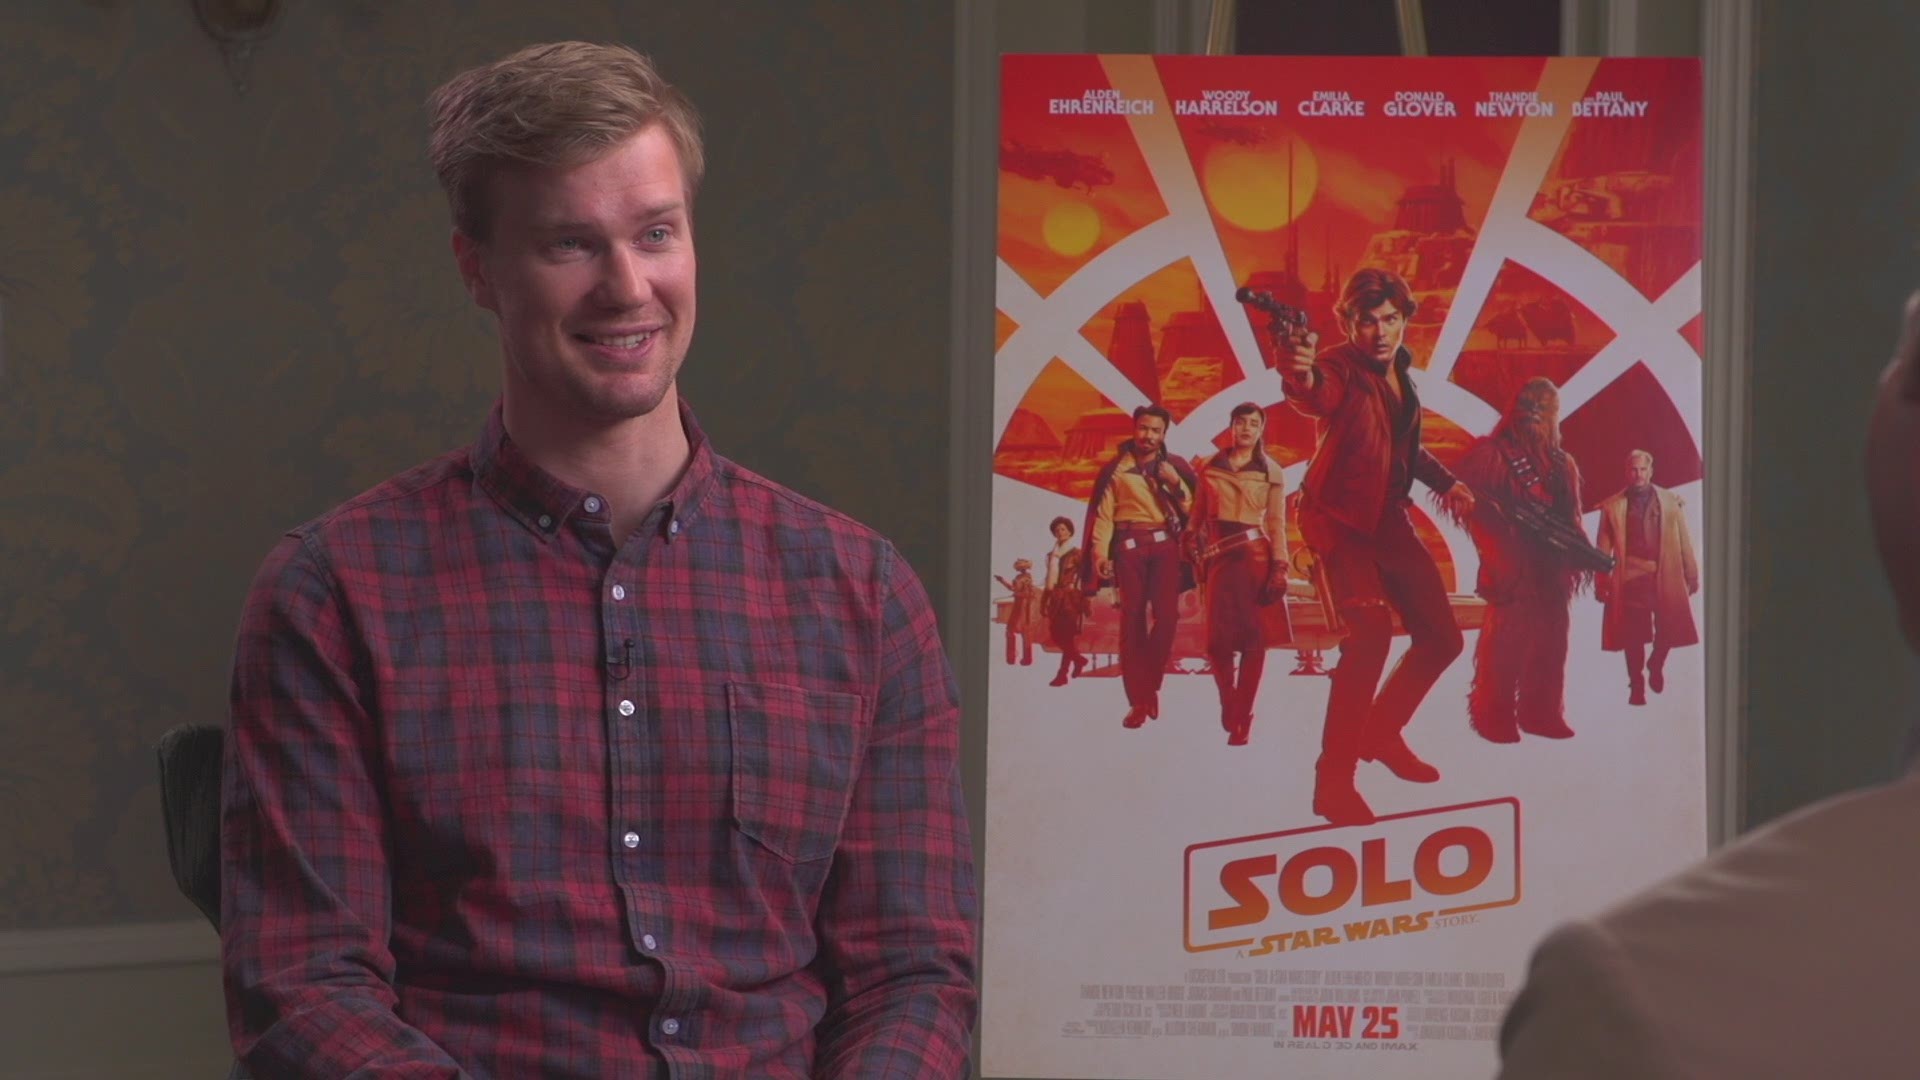 WFAA's Ron Corning sits down with Joonas Suotamo. Chewbacca from "Solo: A Star Wars Story"